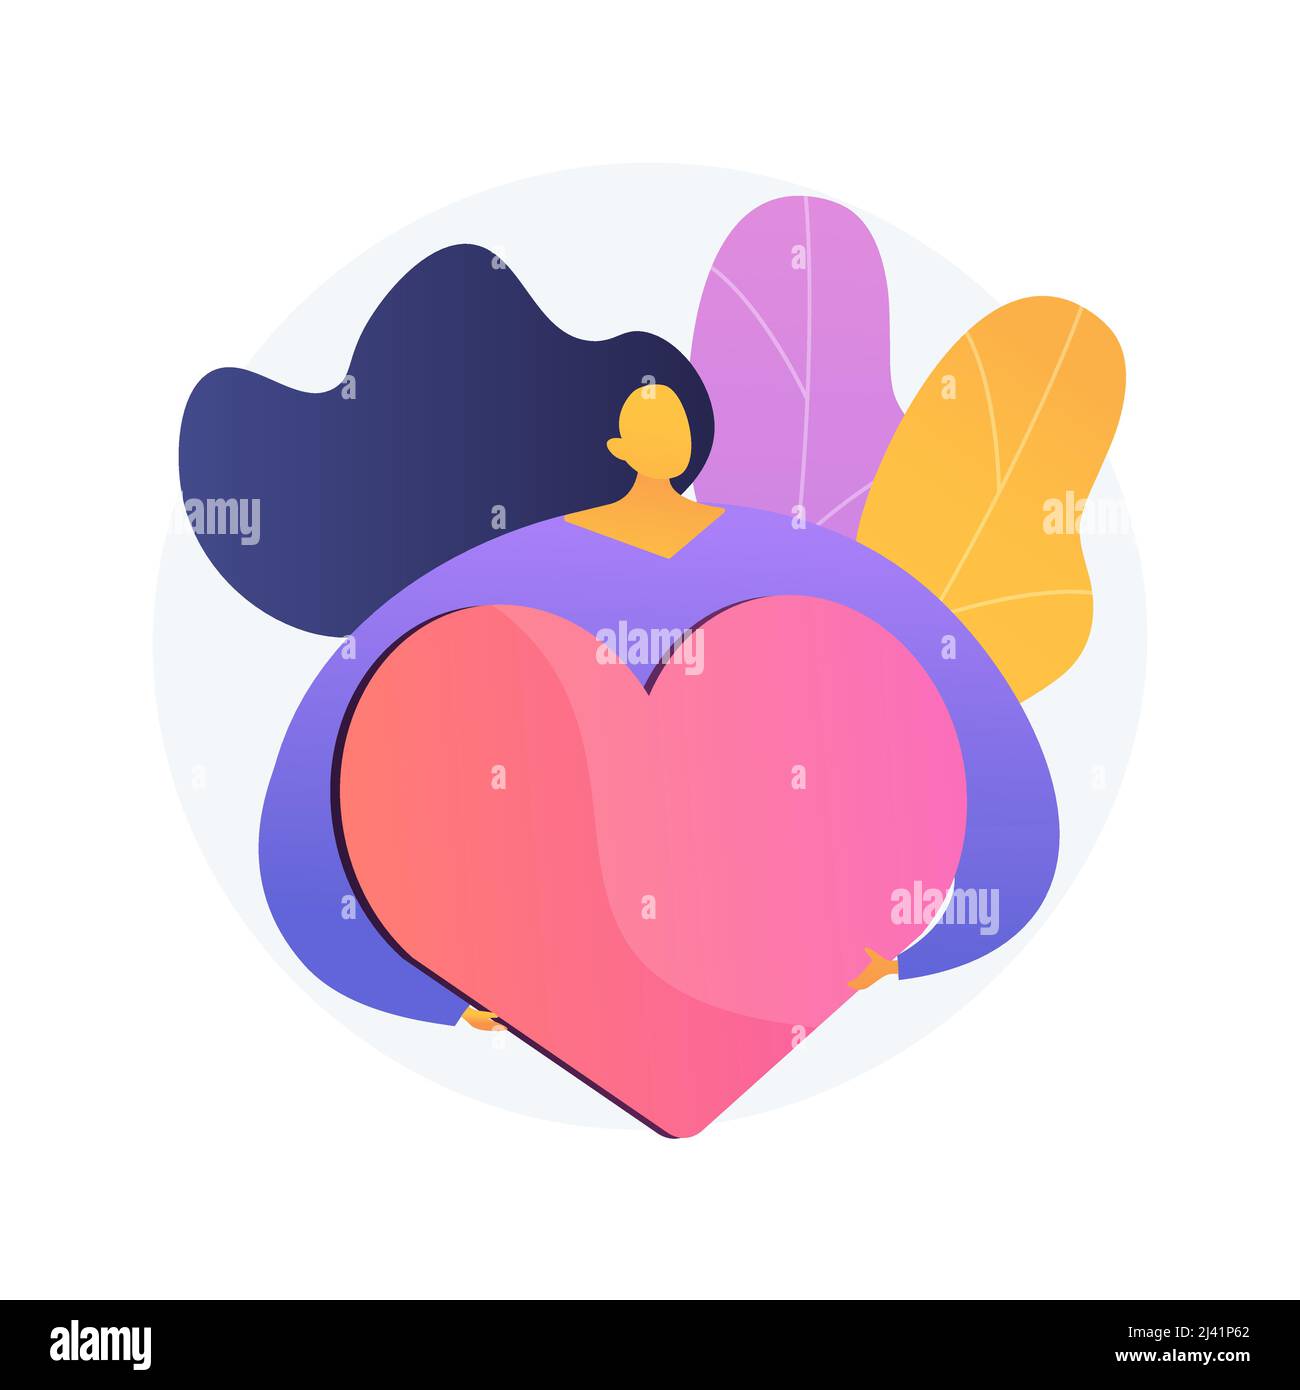 Self-concept abstract concept vector illustration. Positive self-perception, self-concept type, personal image, individual psychology, person definiti Stock Vector